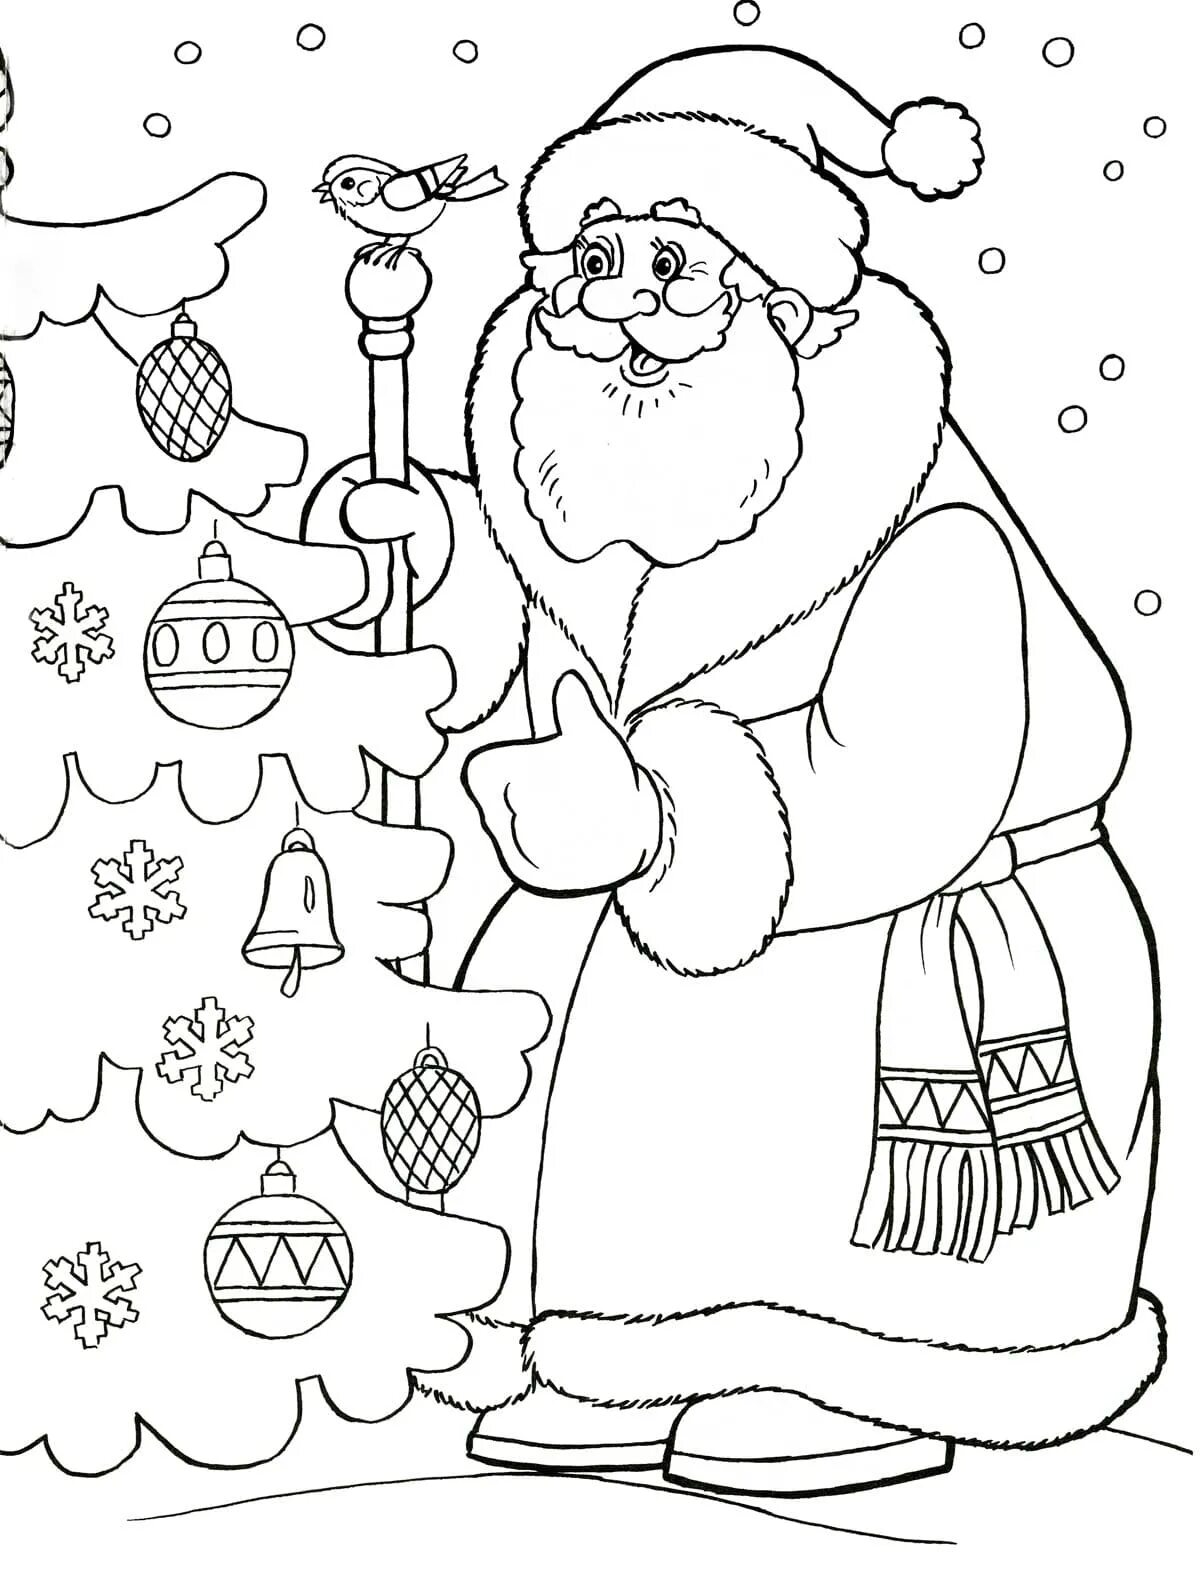 Santa Claus and Christmas tree for kids #10